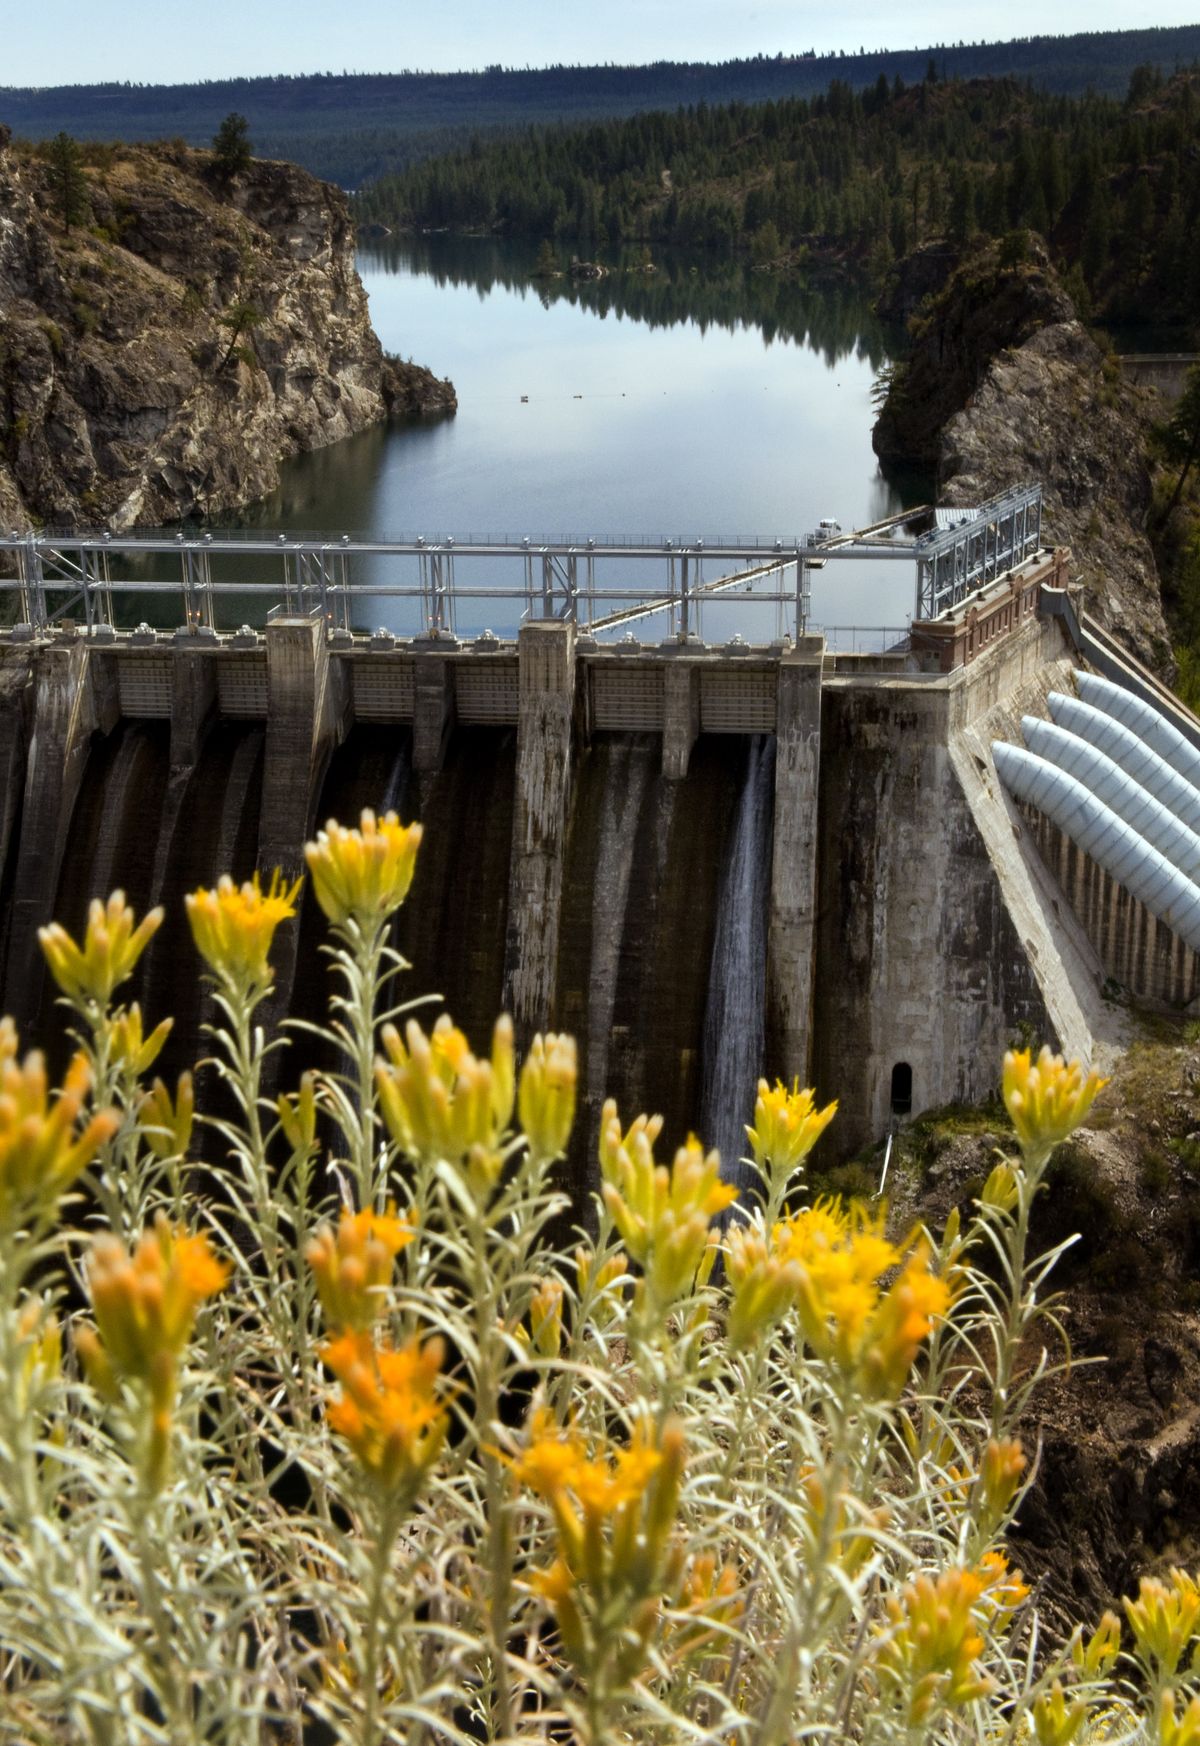 Part of a new Spokane River cleanup plan requires Avista Corp. to increase dissolved oxygen in Long Lake through operation of its hydropower  facilities such as Long Lake Dam. (Colin Mulvany / The Spokesman-Review)